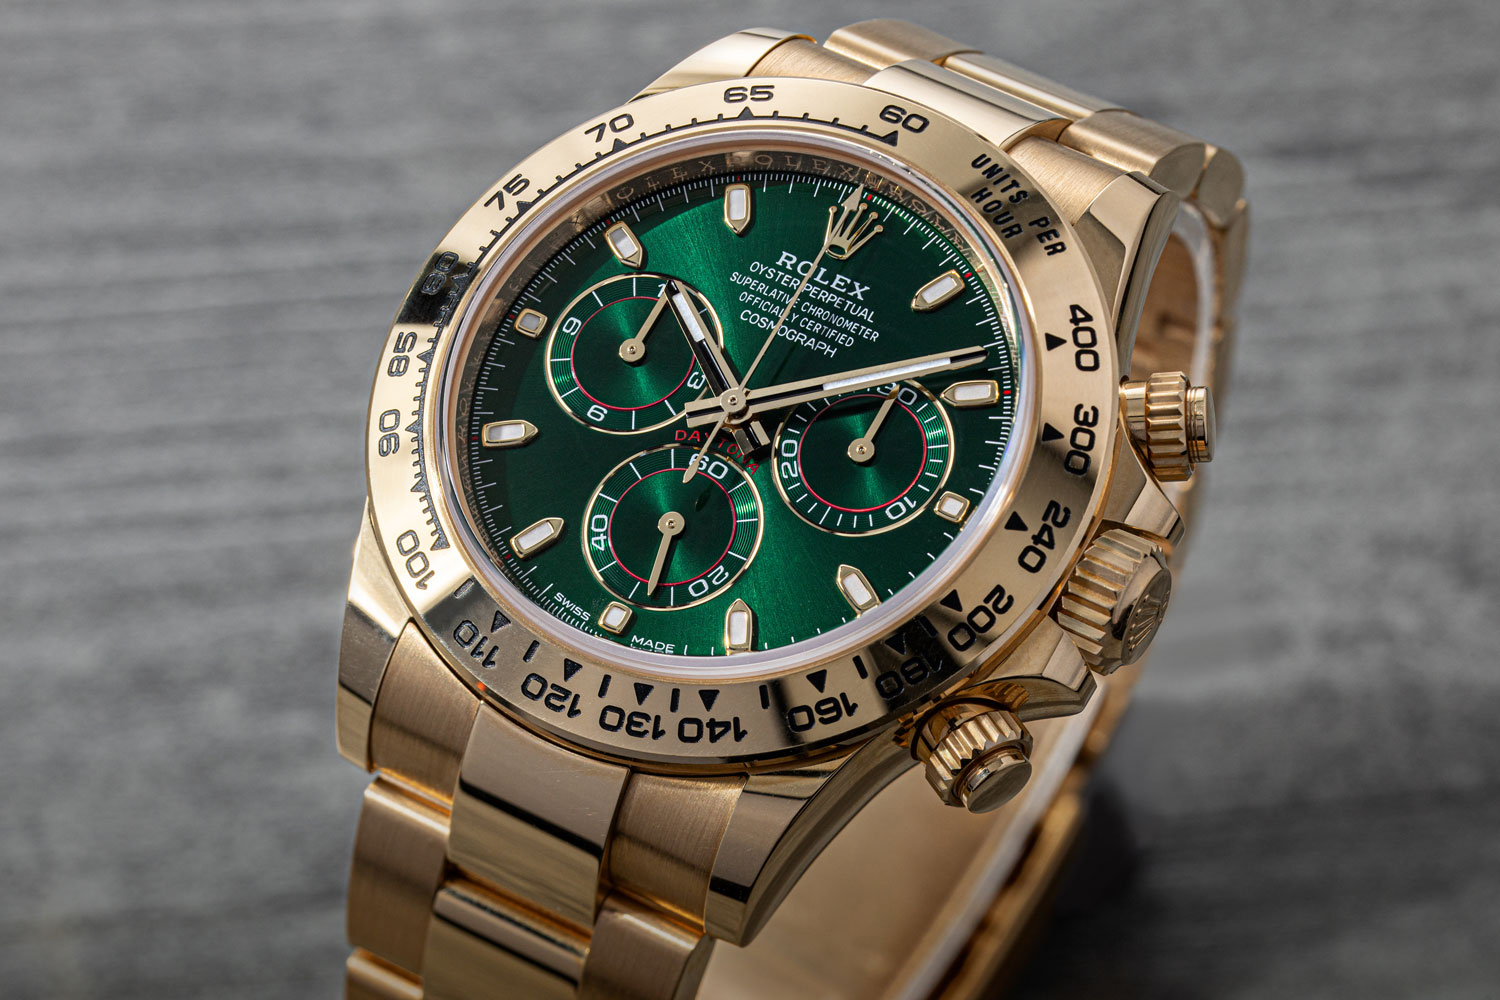 A magnificent chunk of yellow gold goodness - The Rolex Daytona 116508 (Image: Revolution©)